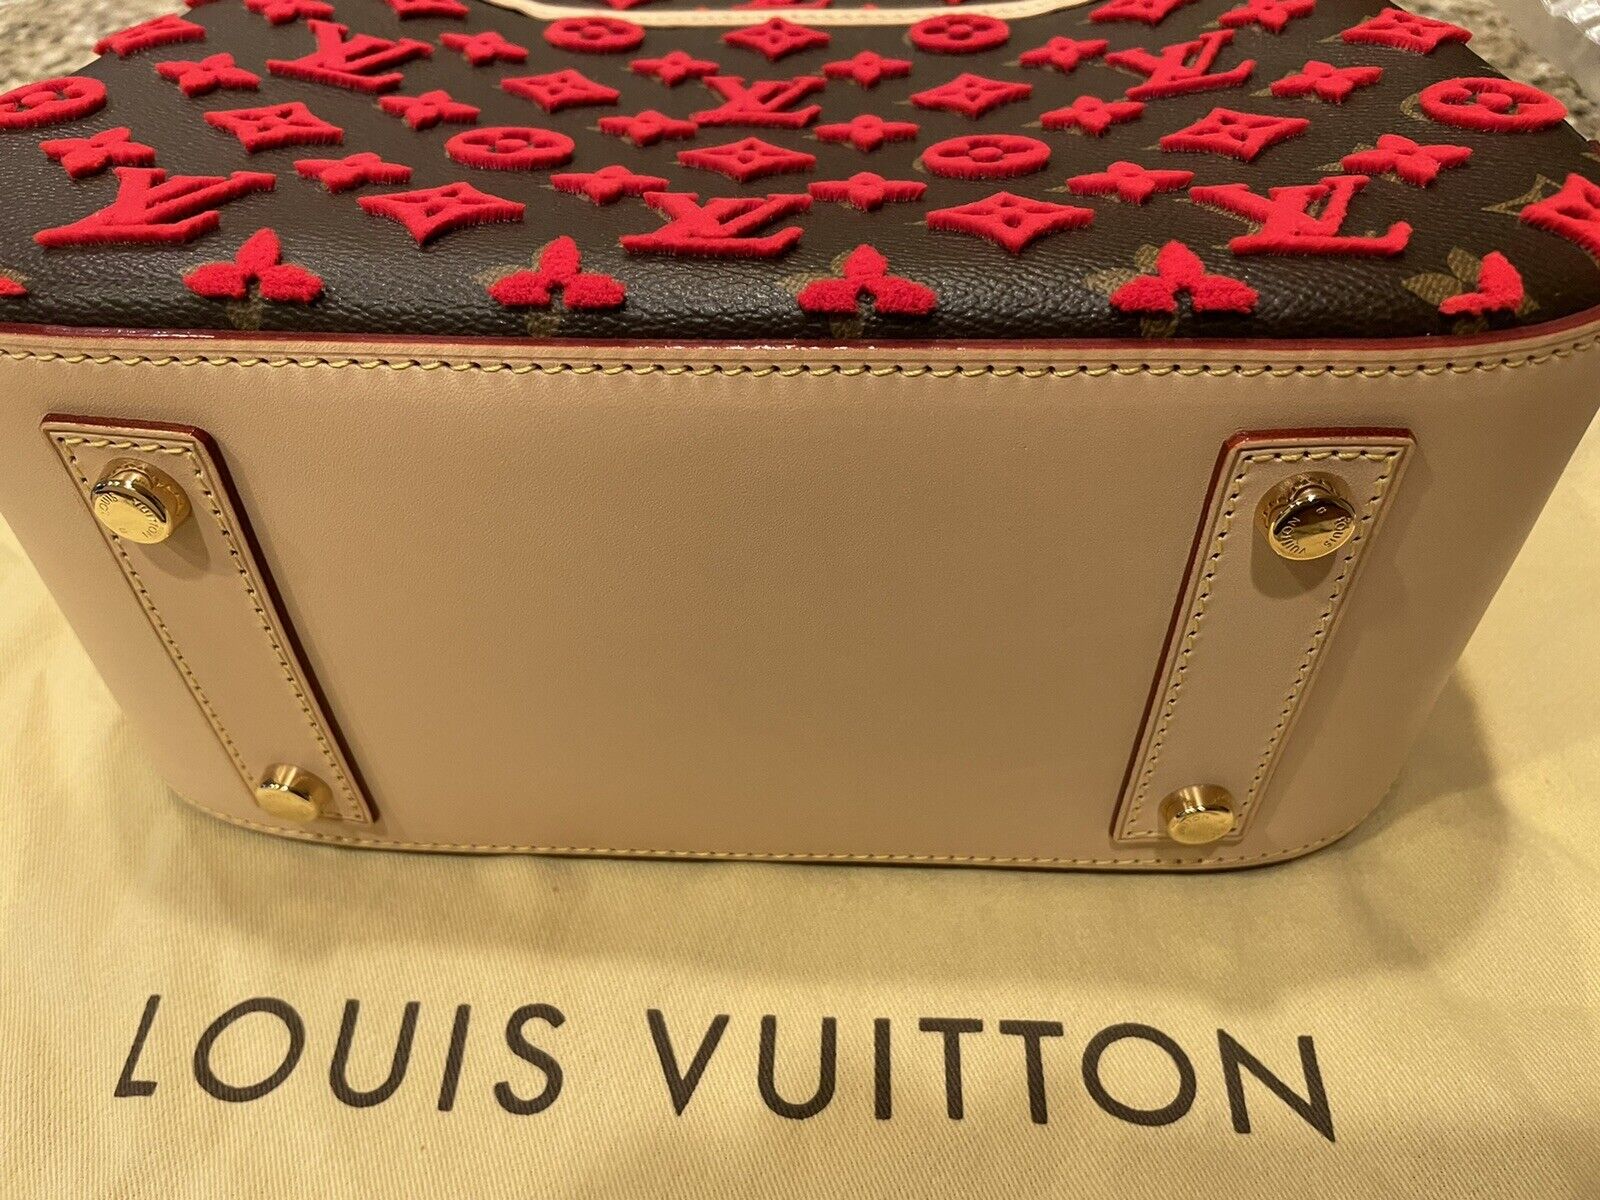 Louis Vuitton Monogram Canvas Tuffetage Deauville Made in France